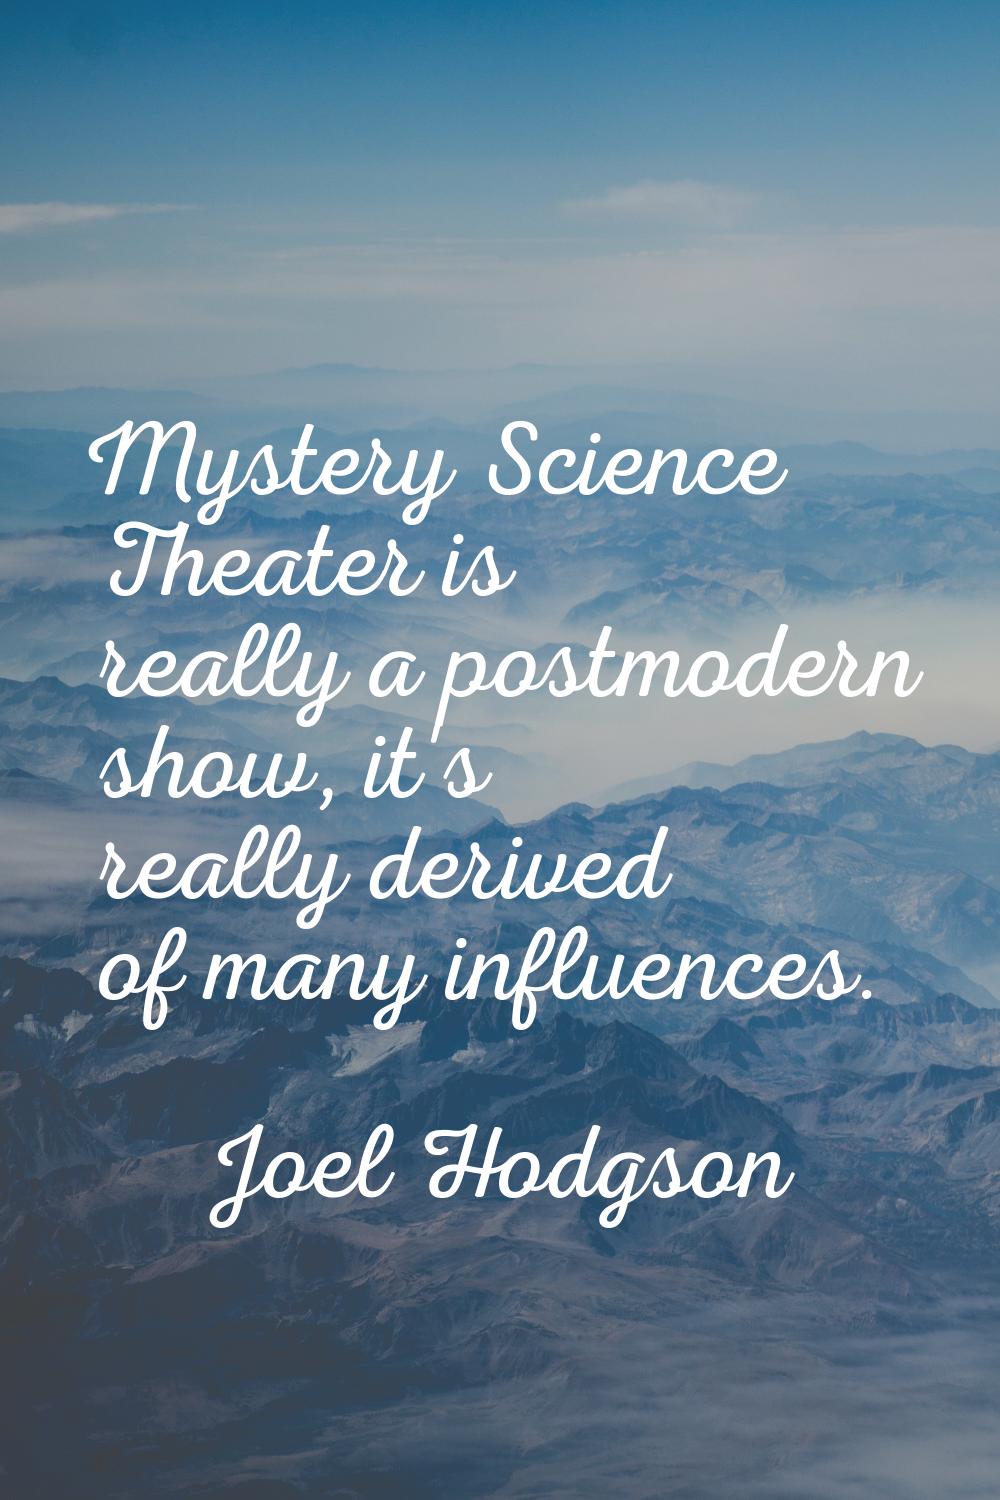 Mystery Science Theater is really a postmodern show, it's really derived of many influences.